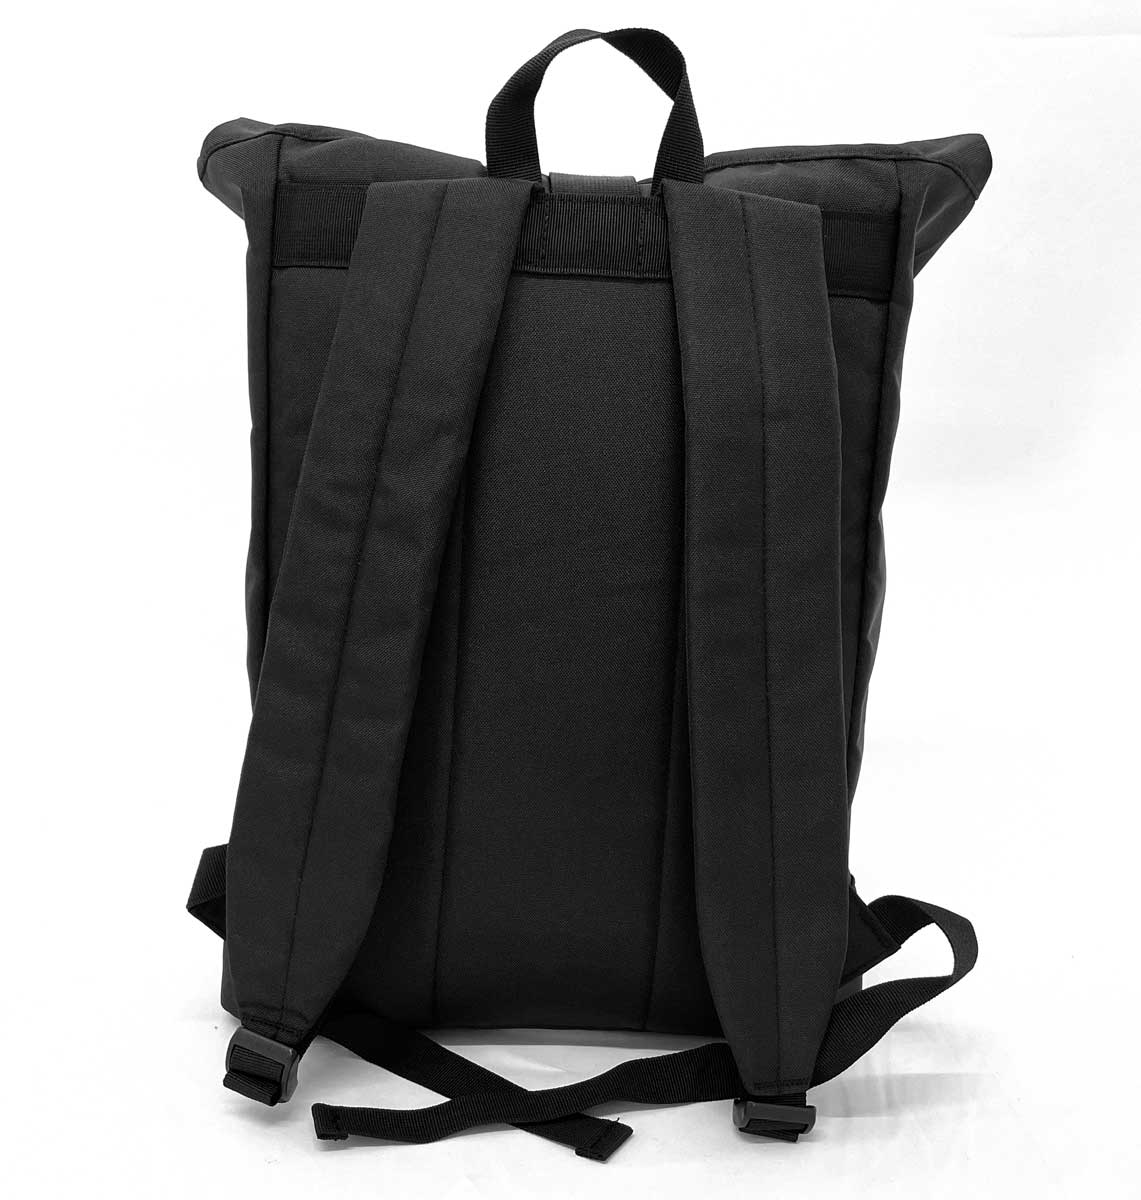 Seal Beach Roll-top Recycled Backpack - Blue Panda